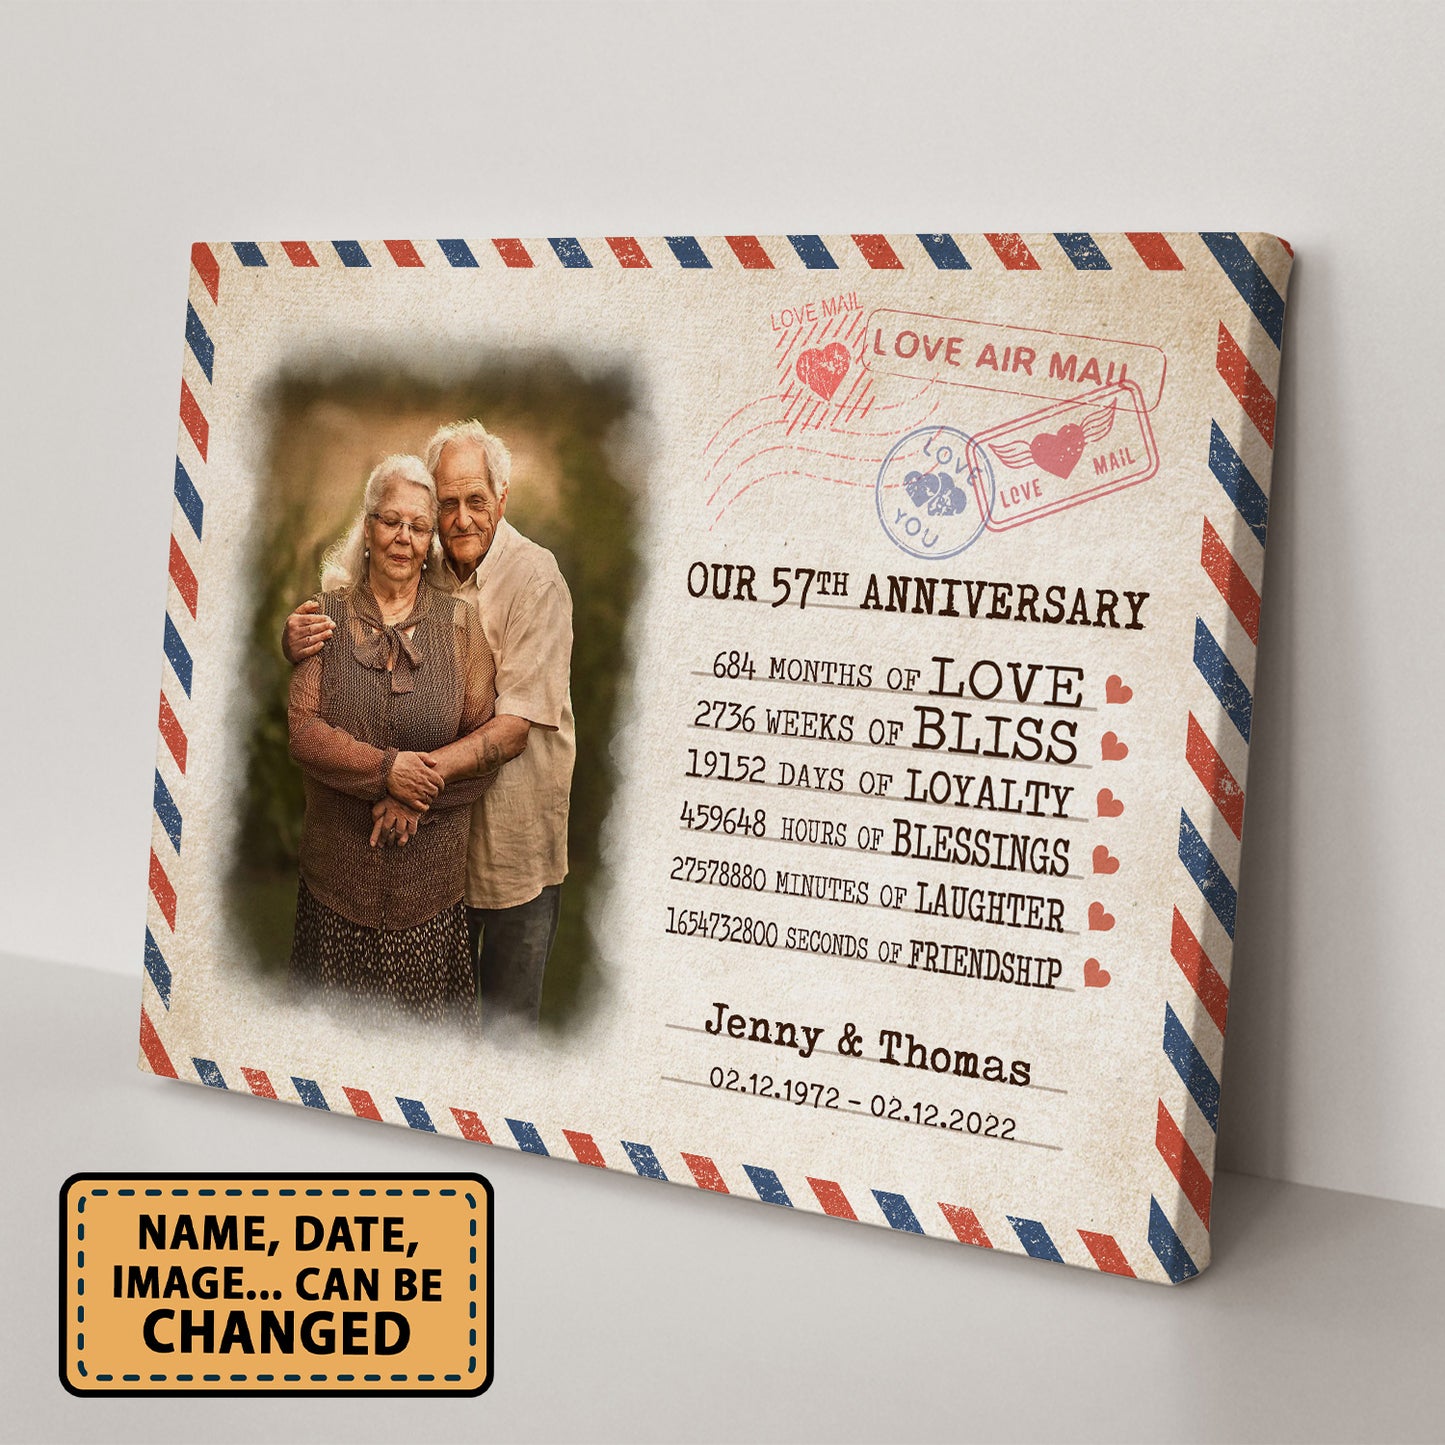 Our 57th Anniversary Letter Valentine Gift Personalized Canvas